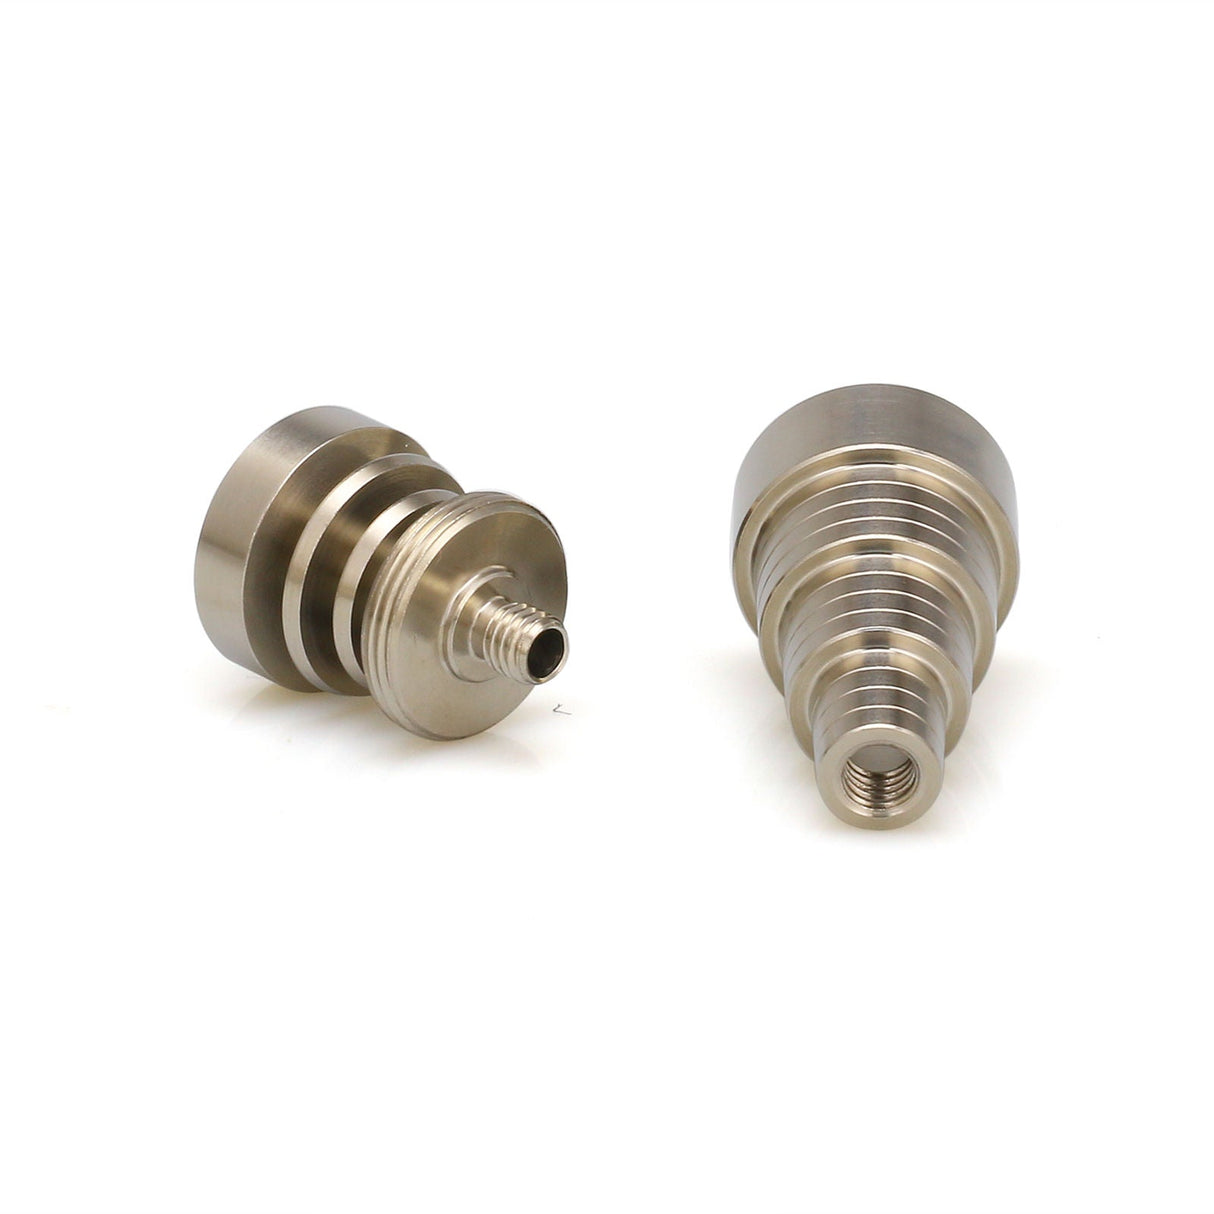 DankGeek Titanium Nail 6 in 1, compatible with 10mm/14mm/18mm, male & female joints, front view